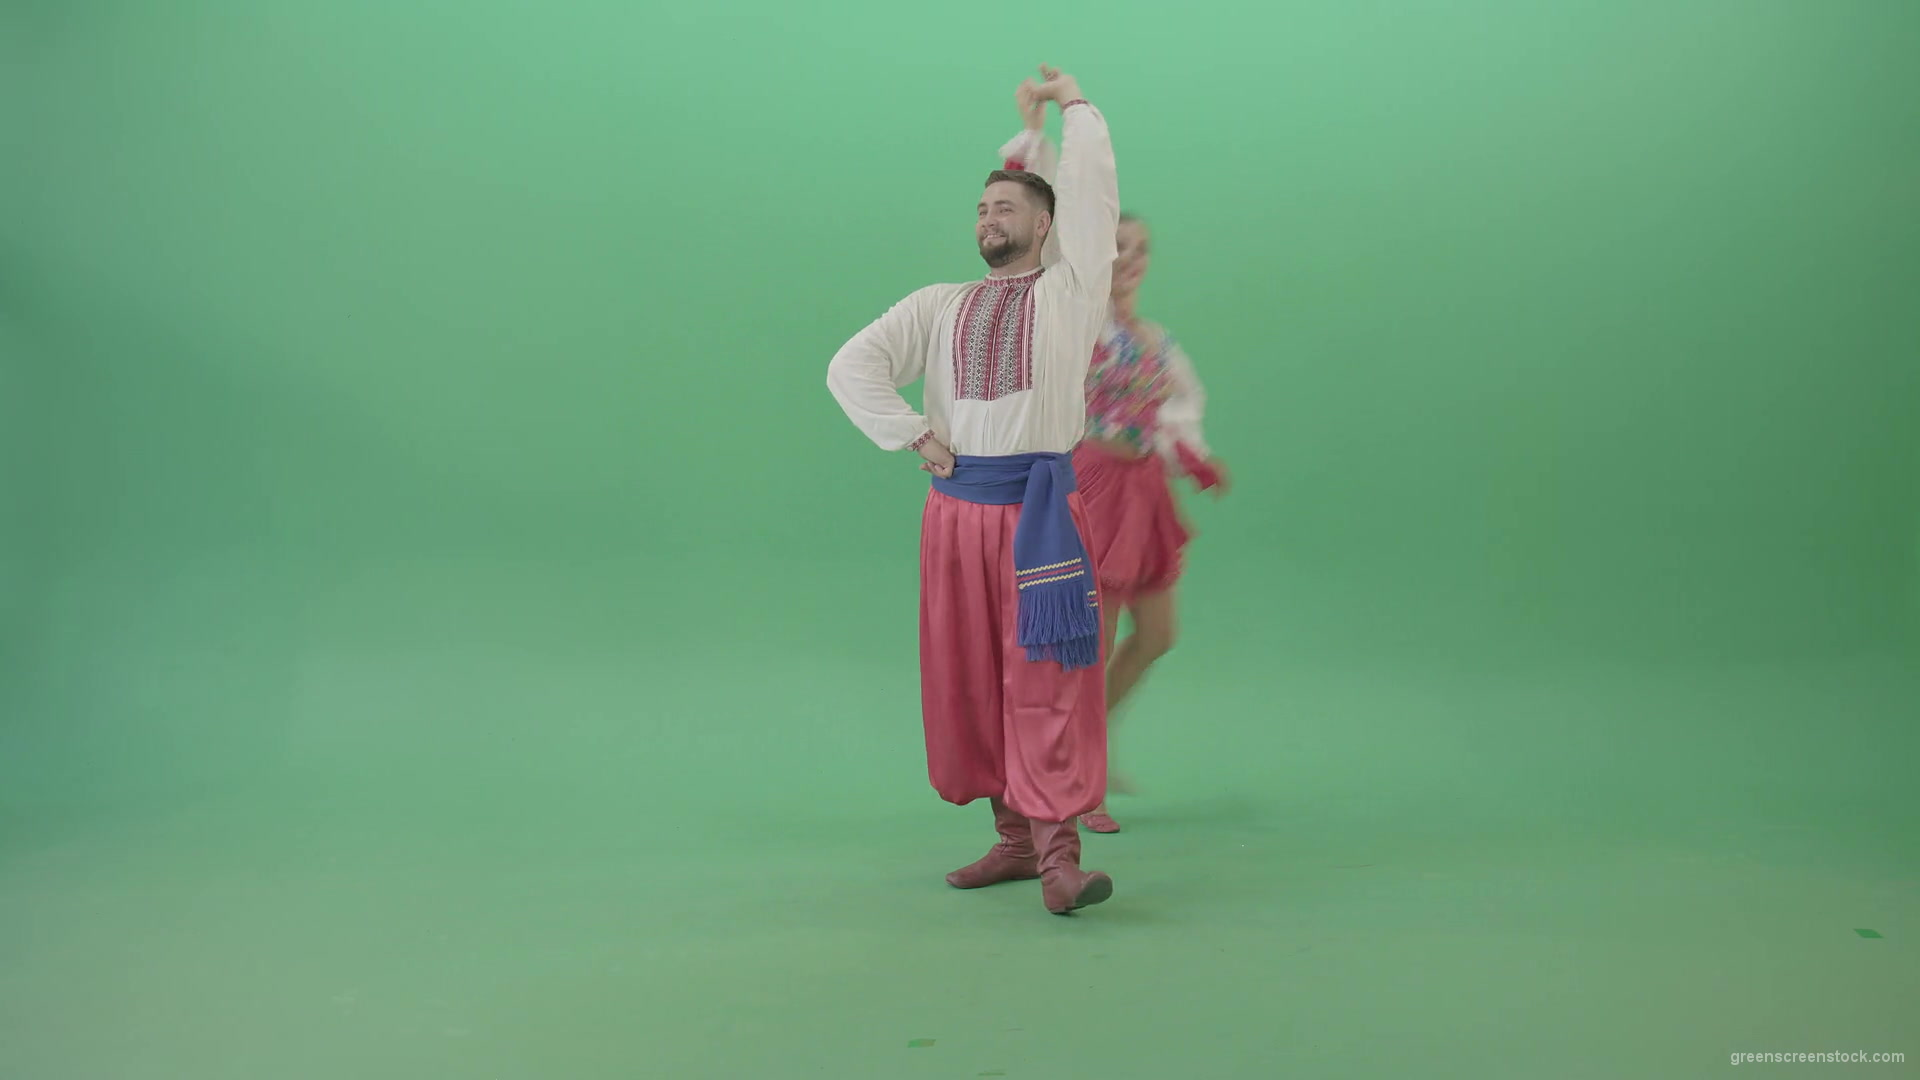 Folk-ethno-ukraine-dancing-boy-and-girl-isolated-on-green-screen-30-fps-4K-Video-Footage-1920_005 Green Screen Stock